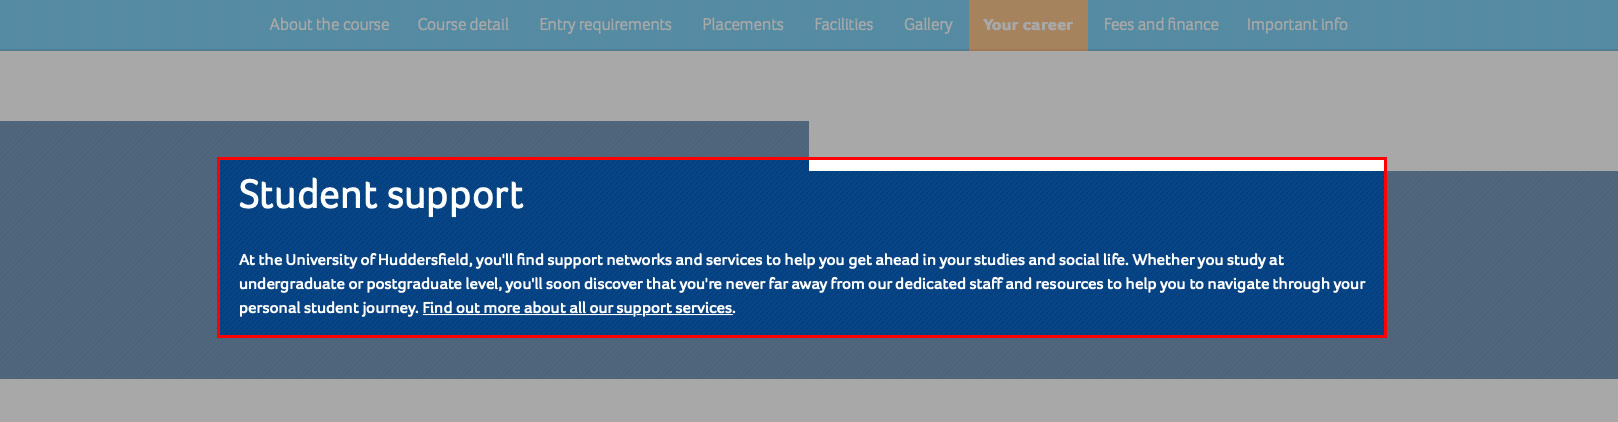 A screenshot of the coursefinder application with the text area of the student support section highlighted.